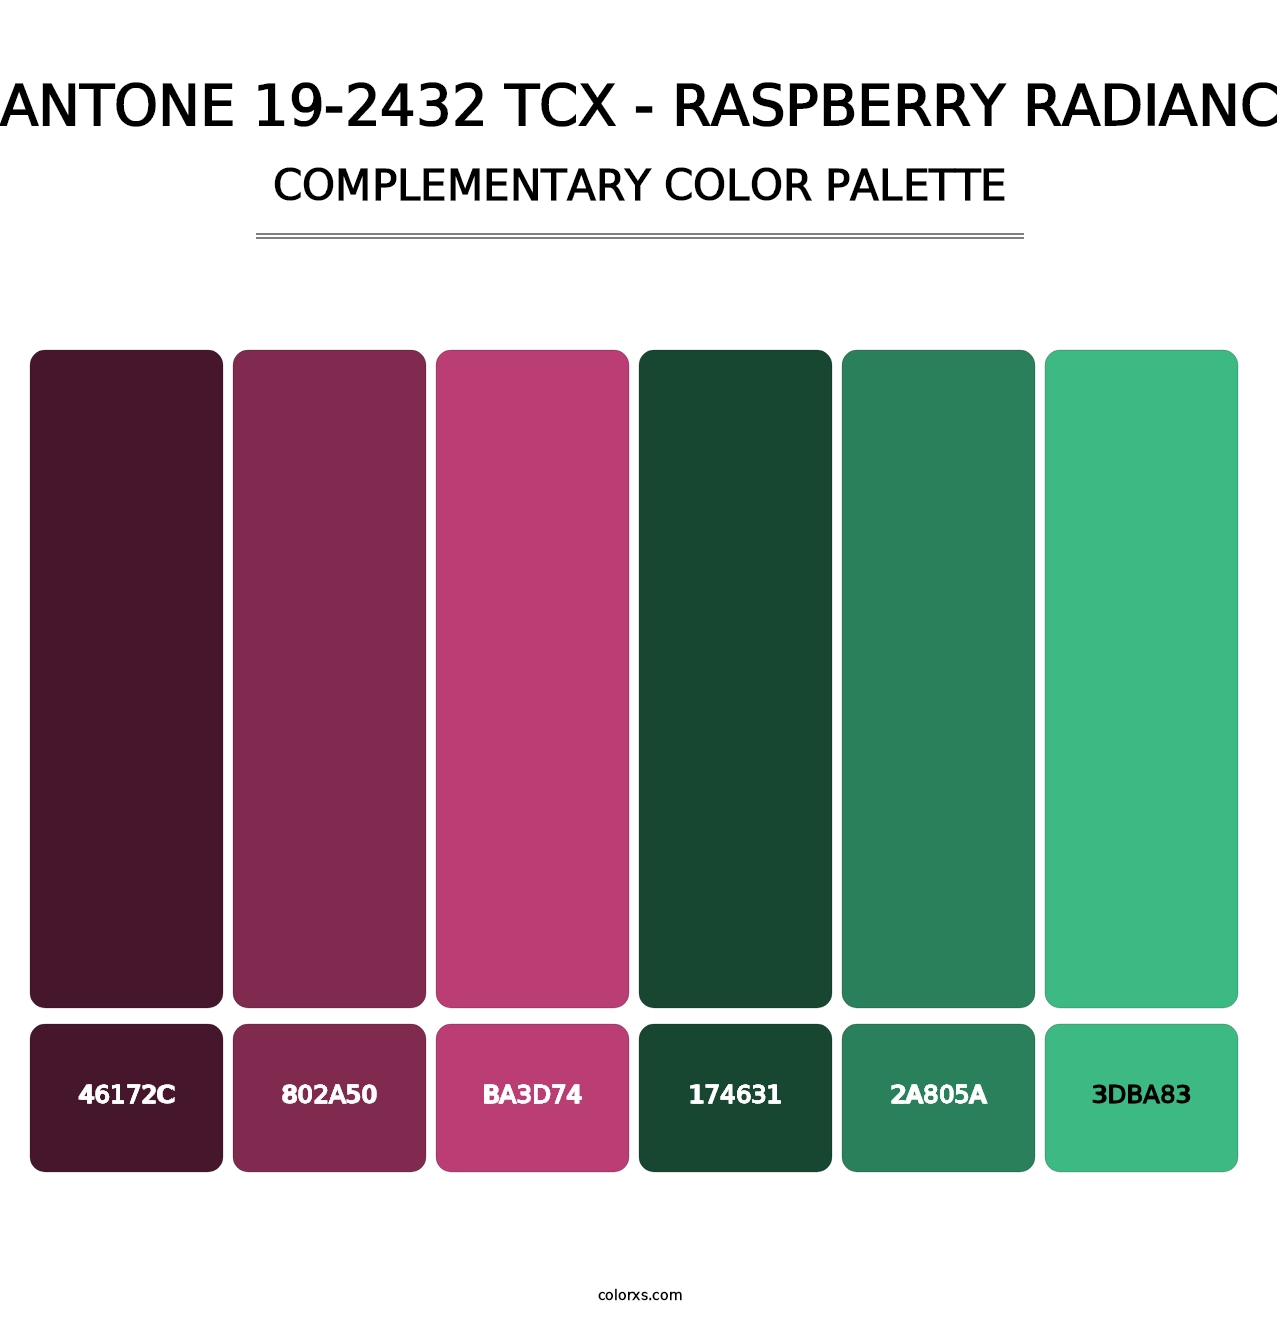 PANTONE 19-2432 TCX - Raspberry Radiance - Complementary Color Palette